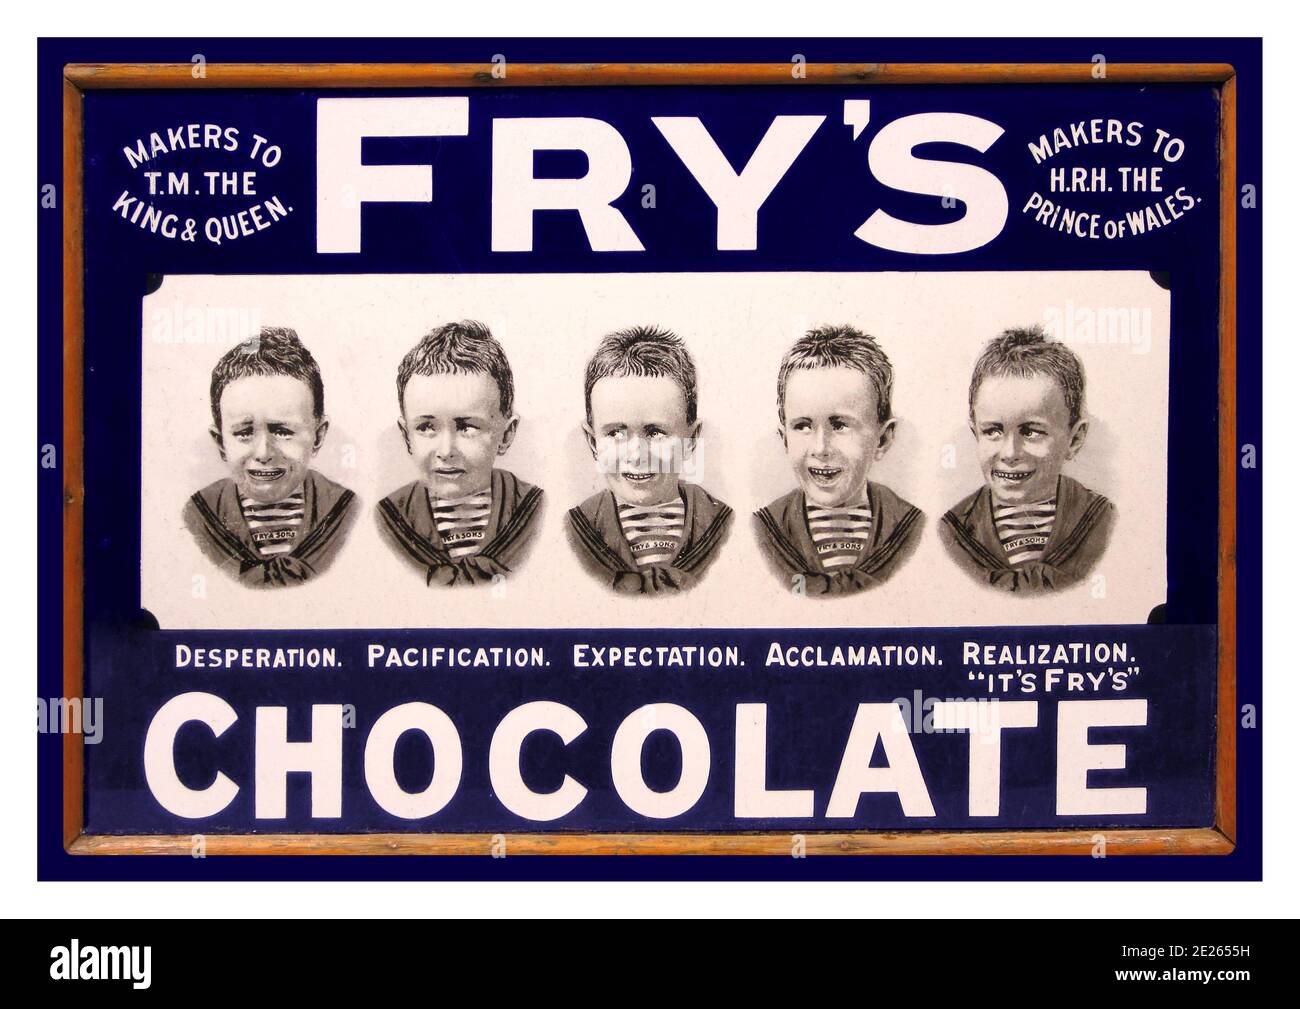 FRYS CHOCOLATE Vintage 1900's Enamel Wall Plaque advertising  Fry's Chocolate showing a young boy in 5 stages of chocolate need & expectations Confectionary sweets treat etc Makers to HRH Prince of Wales and The King & Queen Stock Photo